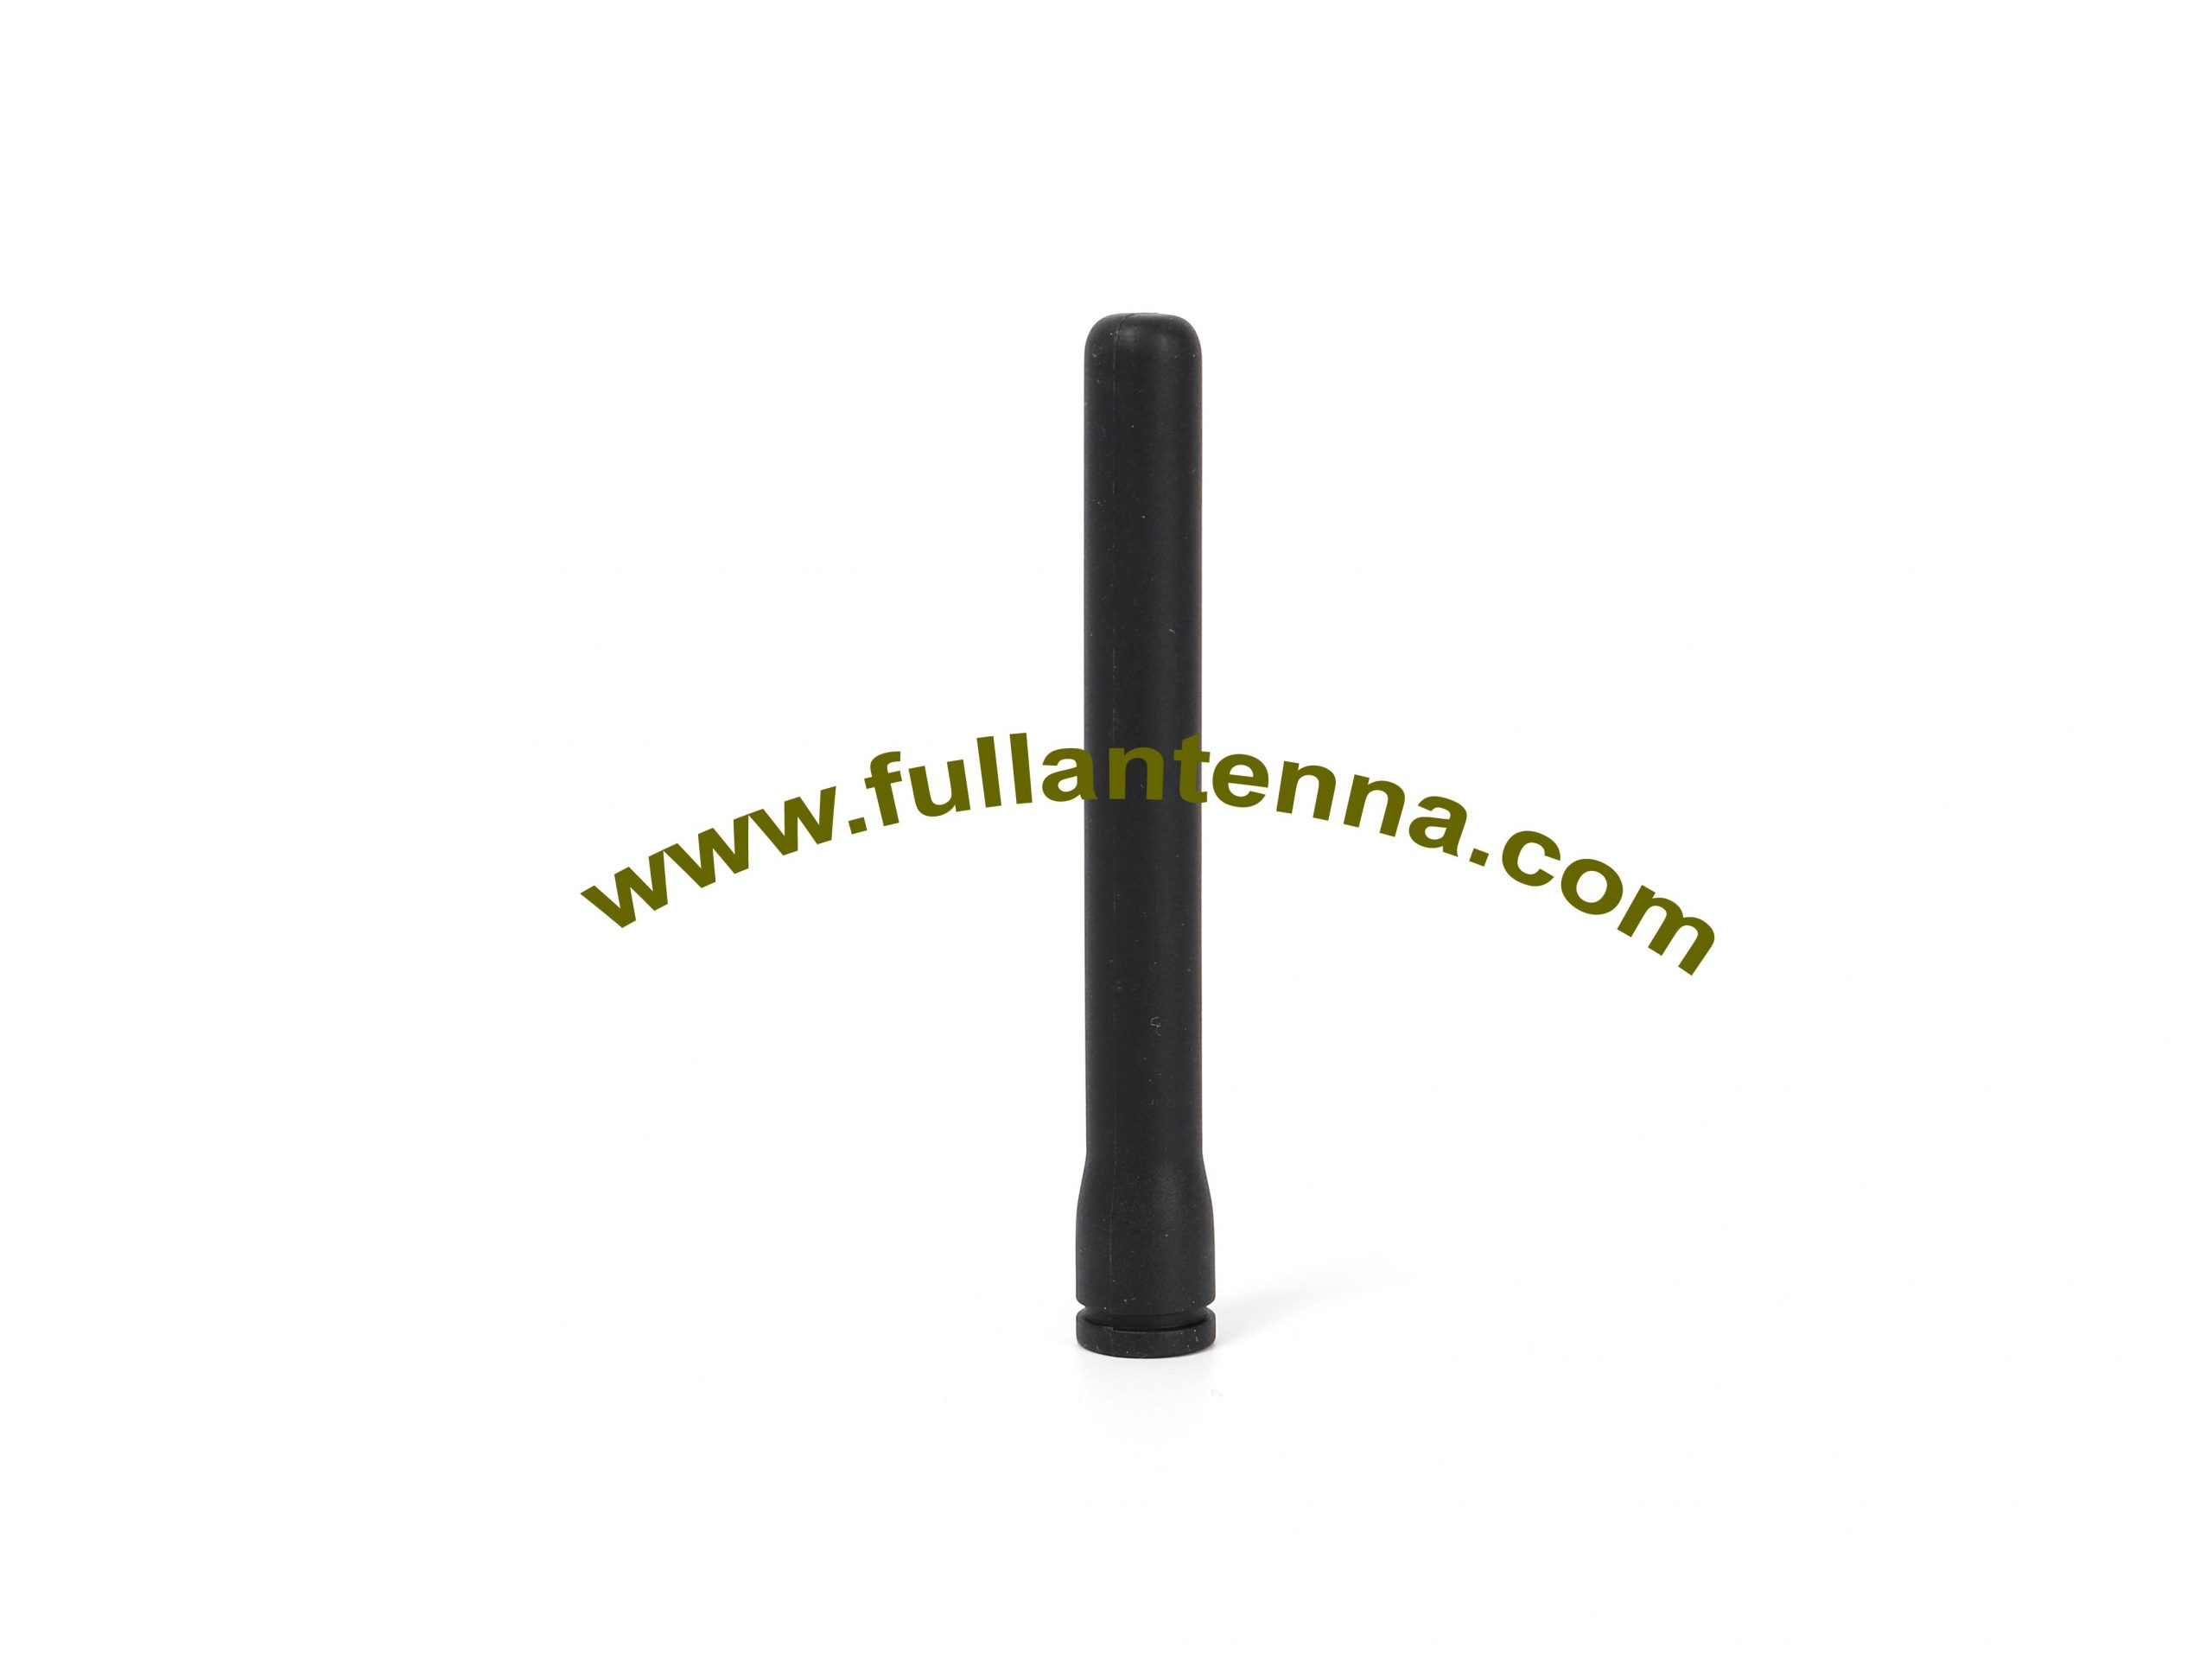 P/N:FAGSM02.05,GSM Rubber Antenna, FME female or SMA male 3dbi